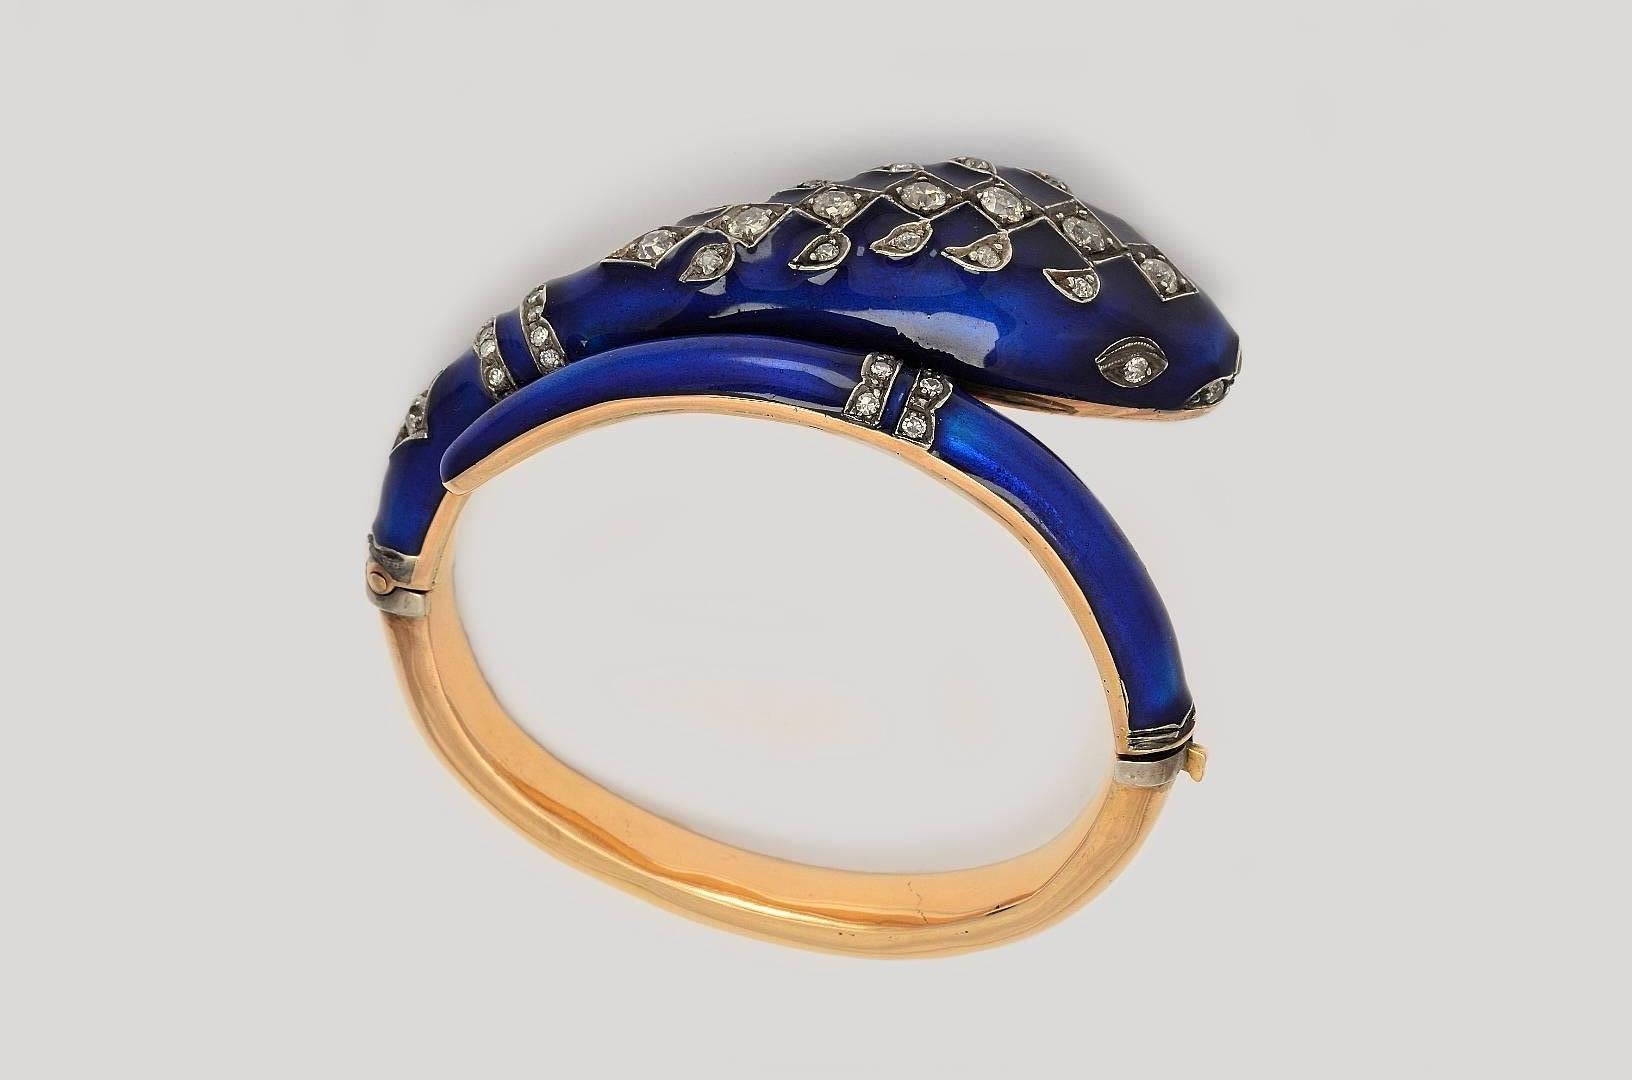 Snake bangle bracelet with silver topped and Gold 18 Kts. backed, with blue enamel and old cut diamonds weighing 2´50 carats.